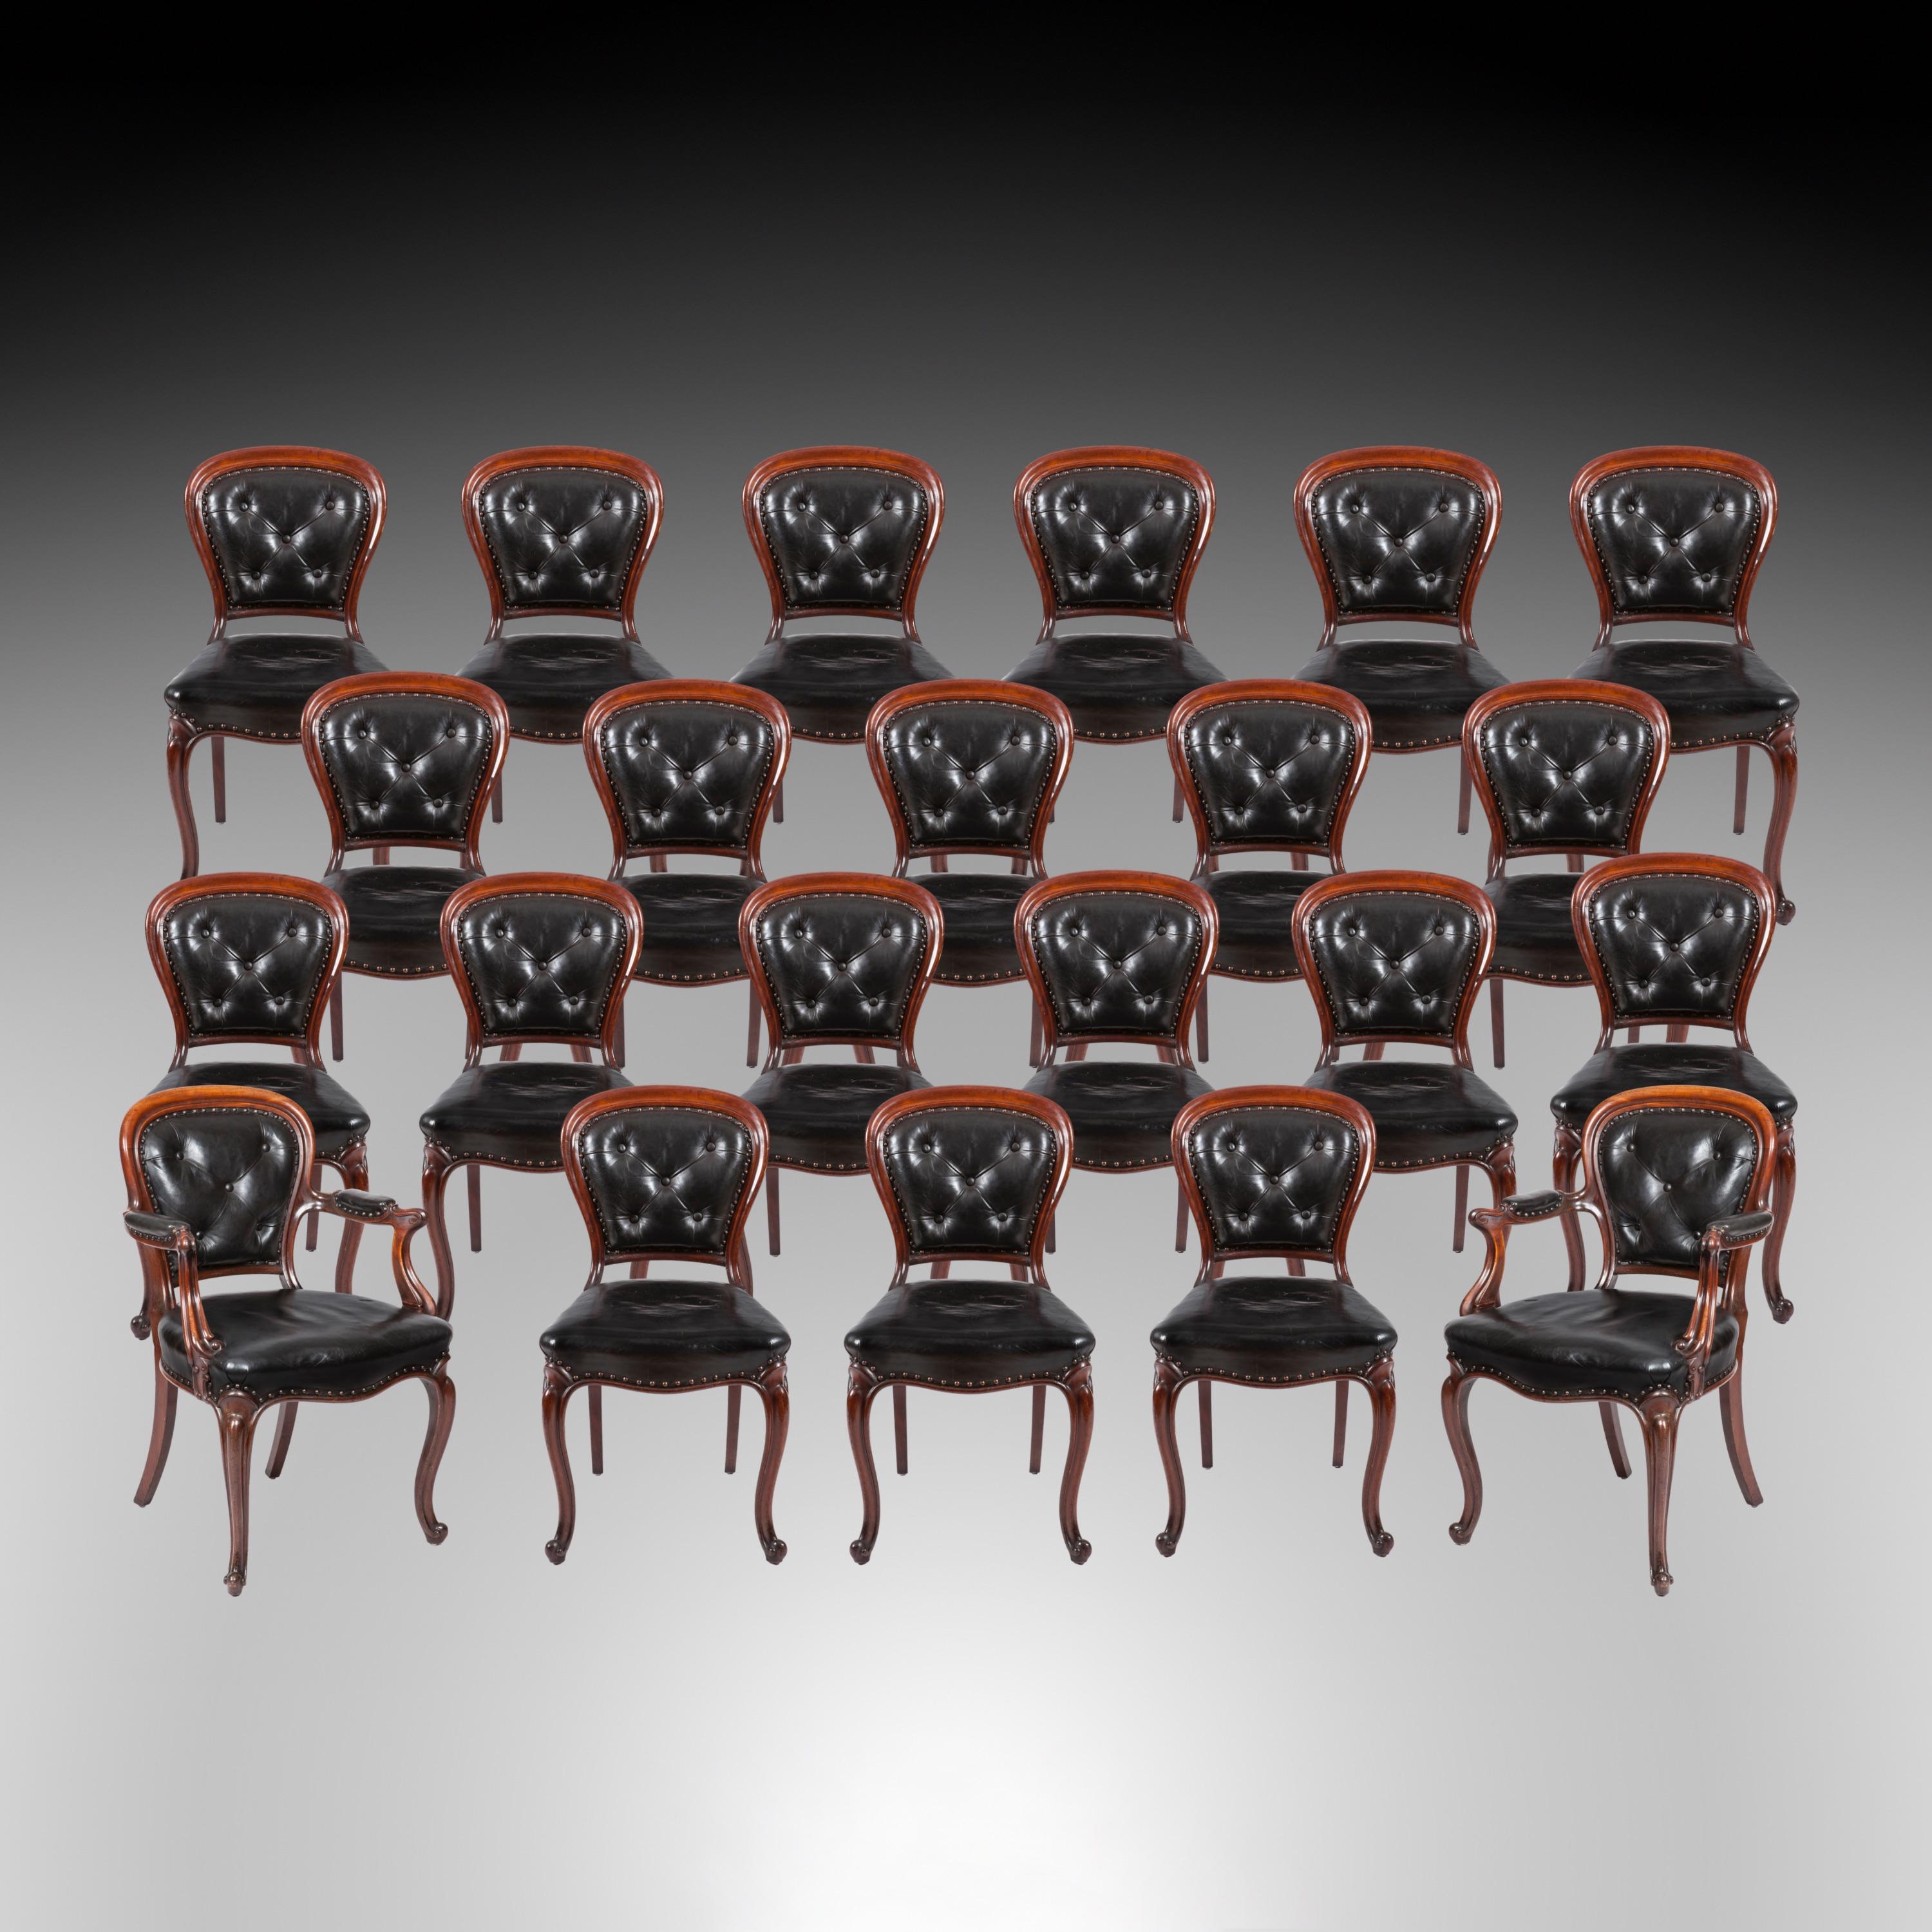 A Large Set of 22 mid-19th century Dining Chairs

Constructed from Honduran mahogany, prized for its strength and beauty, the set consisting of twenty side chairs and two armchairs; with cabriole legs, buttoned leather 'balloon' backs, and